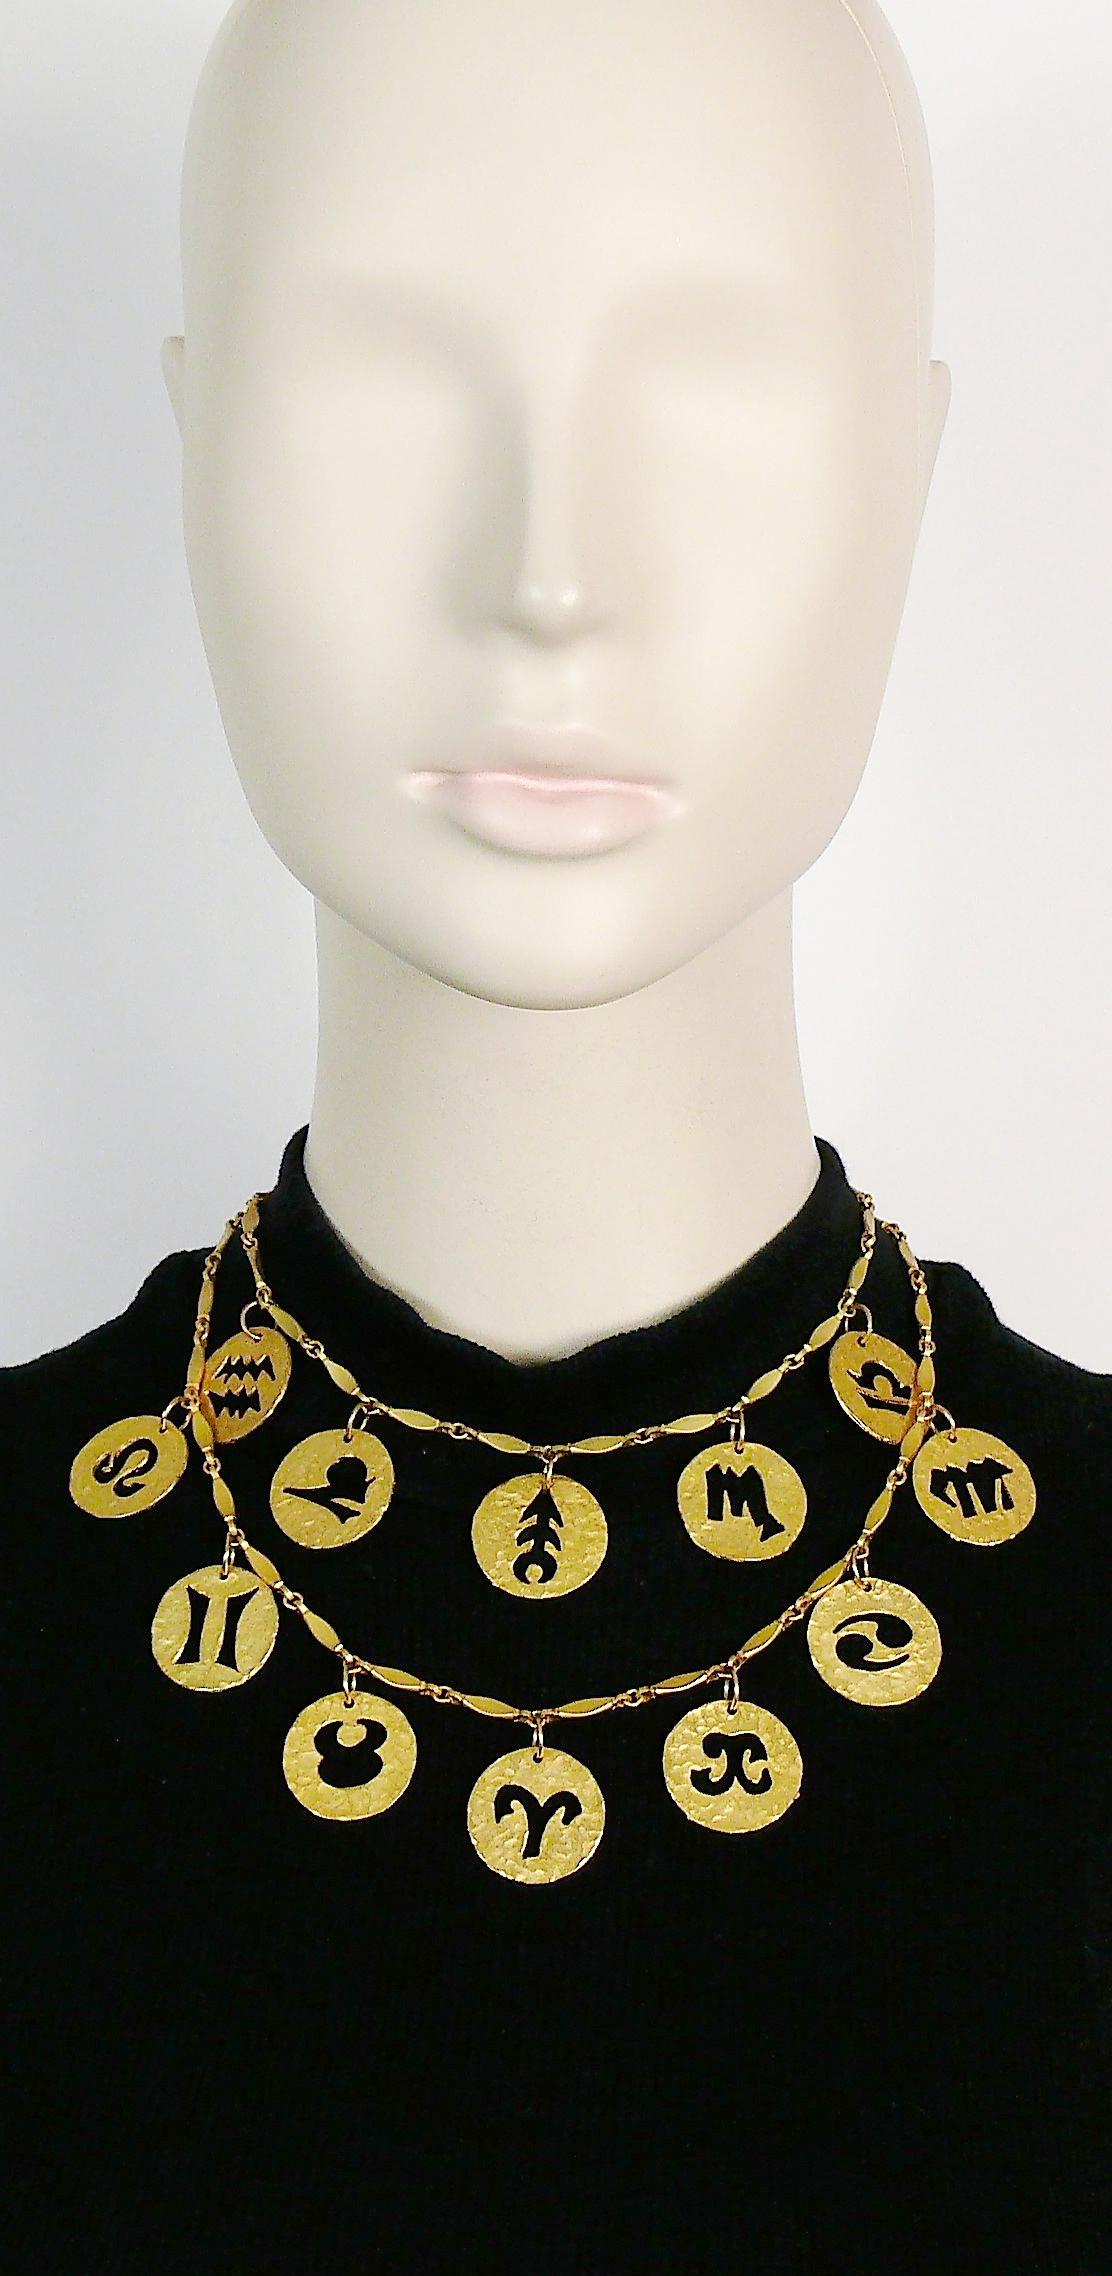 PACO RABANNE vintage matte gold toned double strand necklace featuring the 12 zodiac signs.

Created in the ateliers of the MAISON DESRUES in the 1990s.

Lobster clasp closure.

Marked PACO RABANNE Paris.

Indicative measurements : length approx.